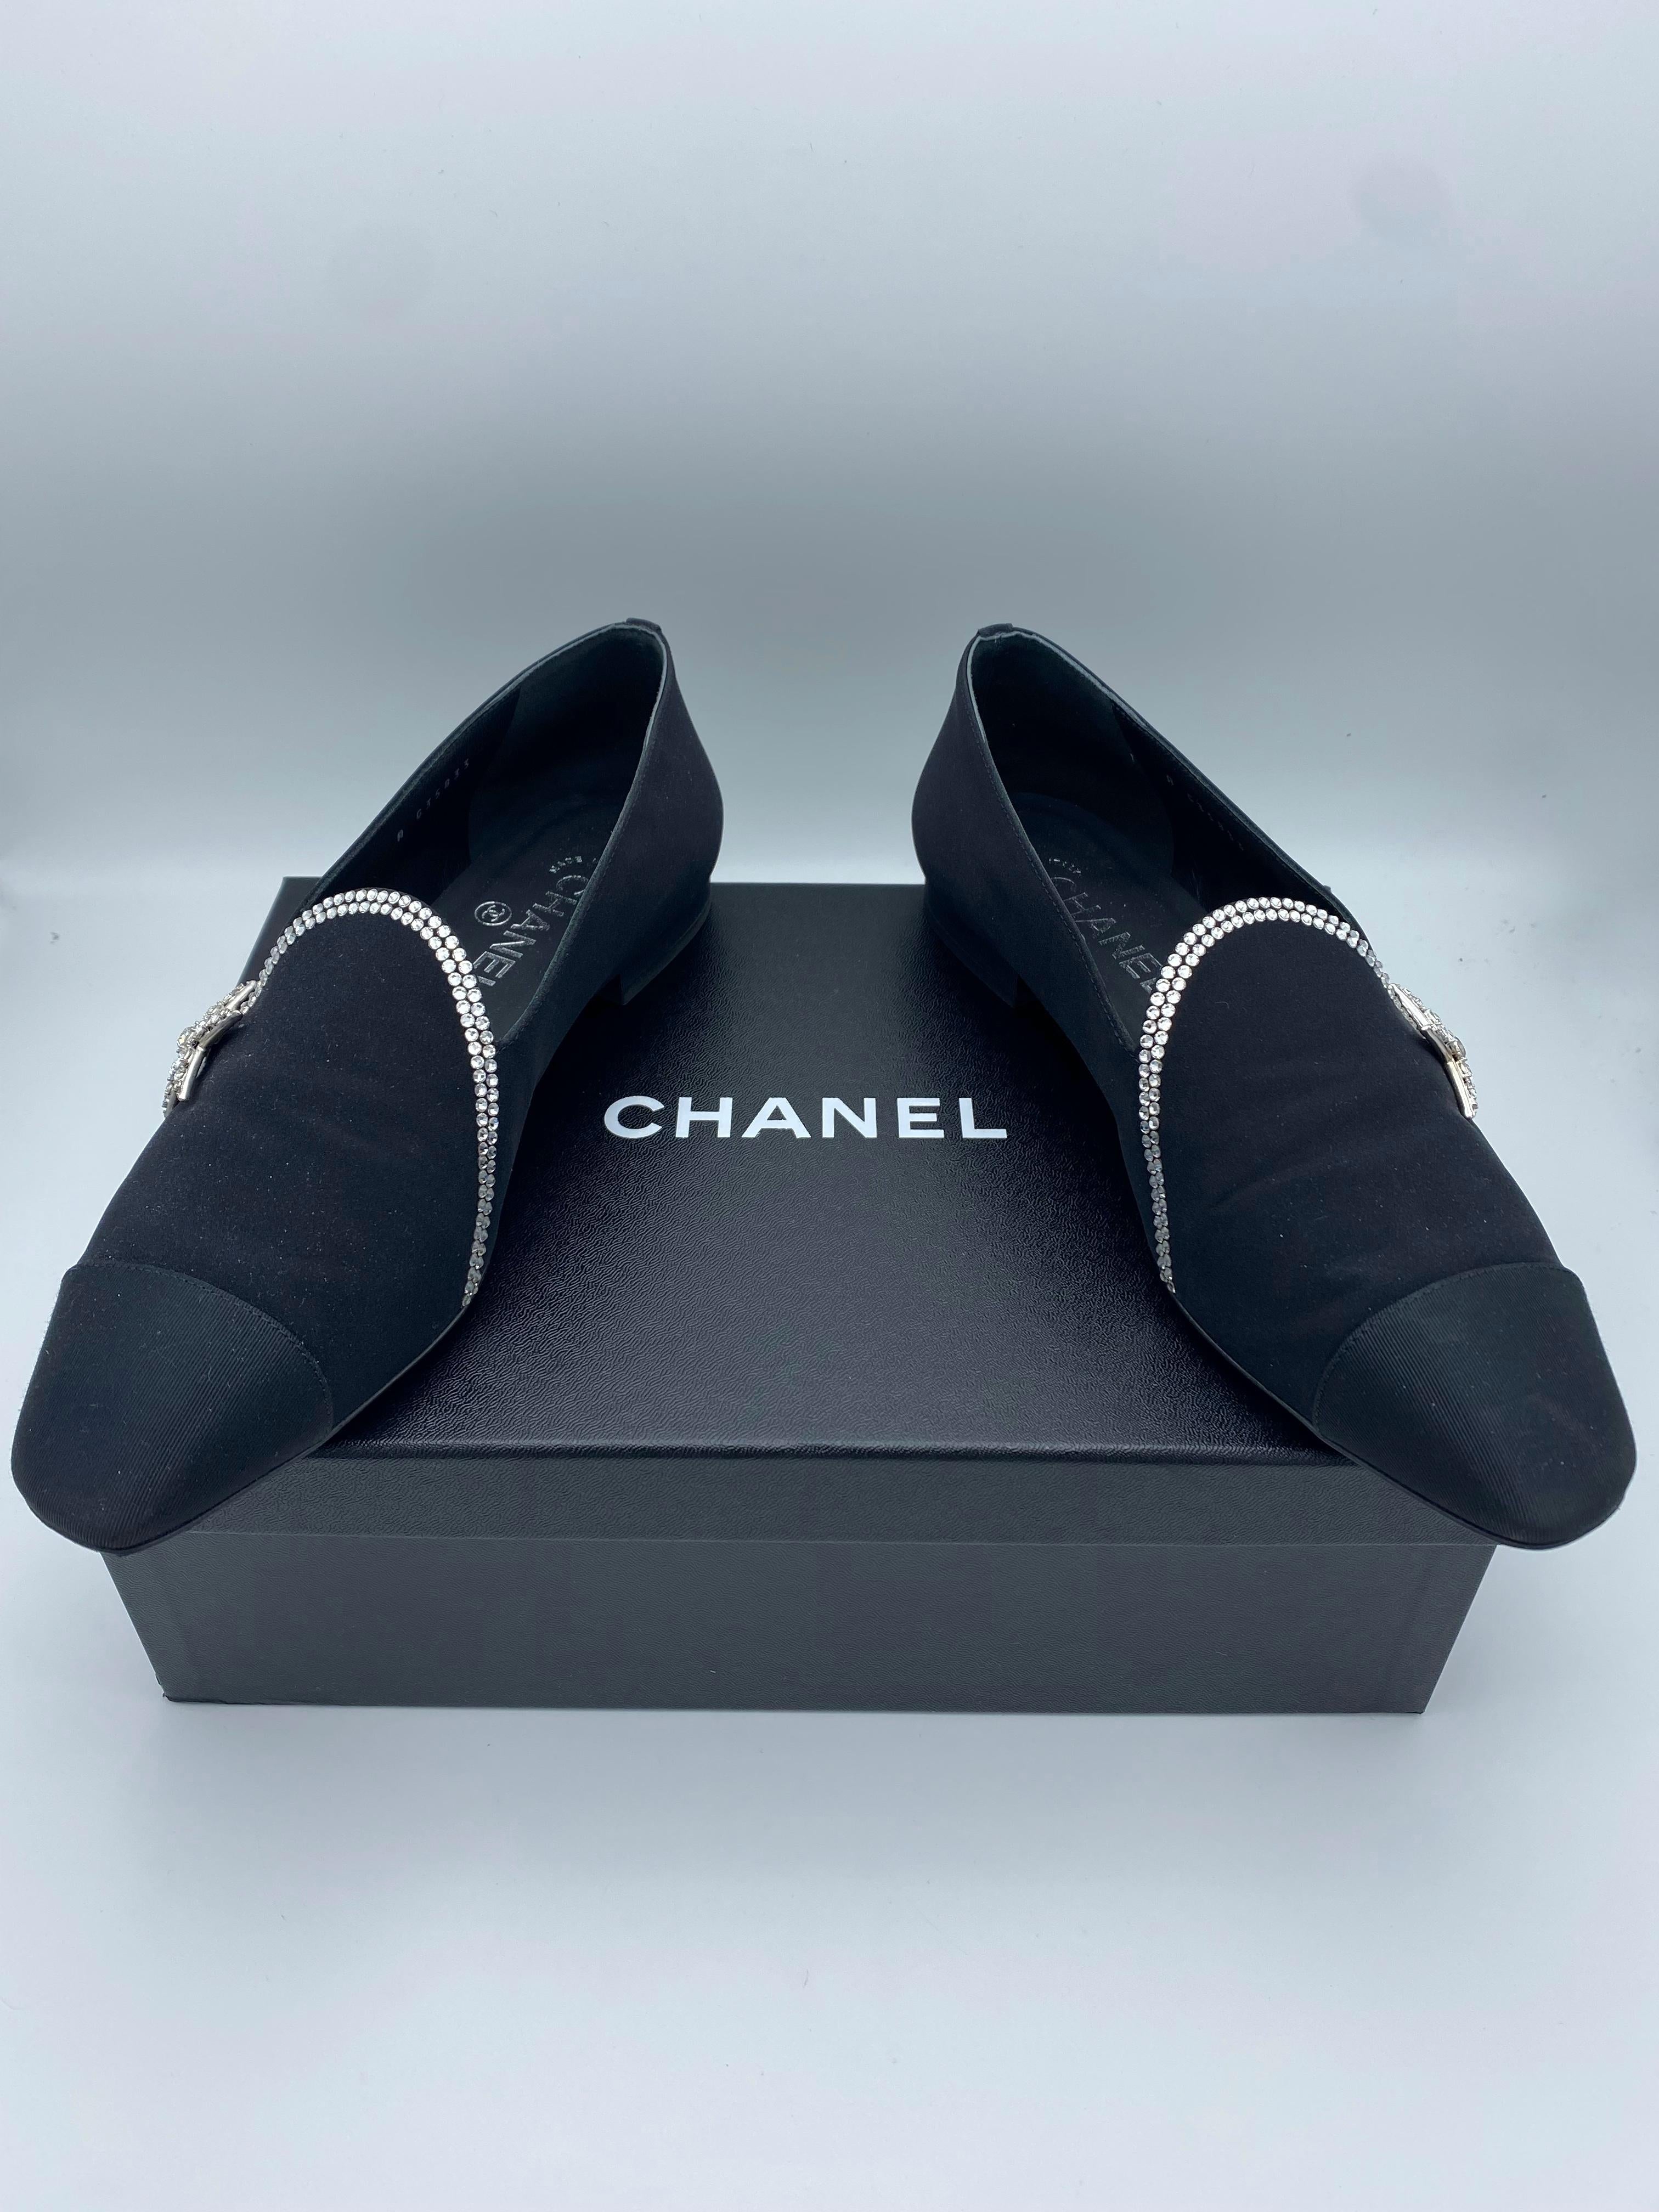 Chanel Black Star Loafers, Size 39 3